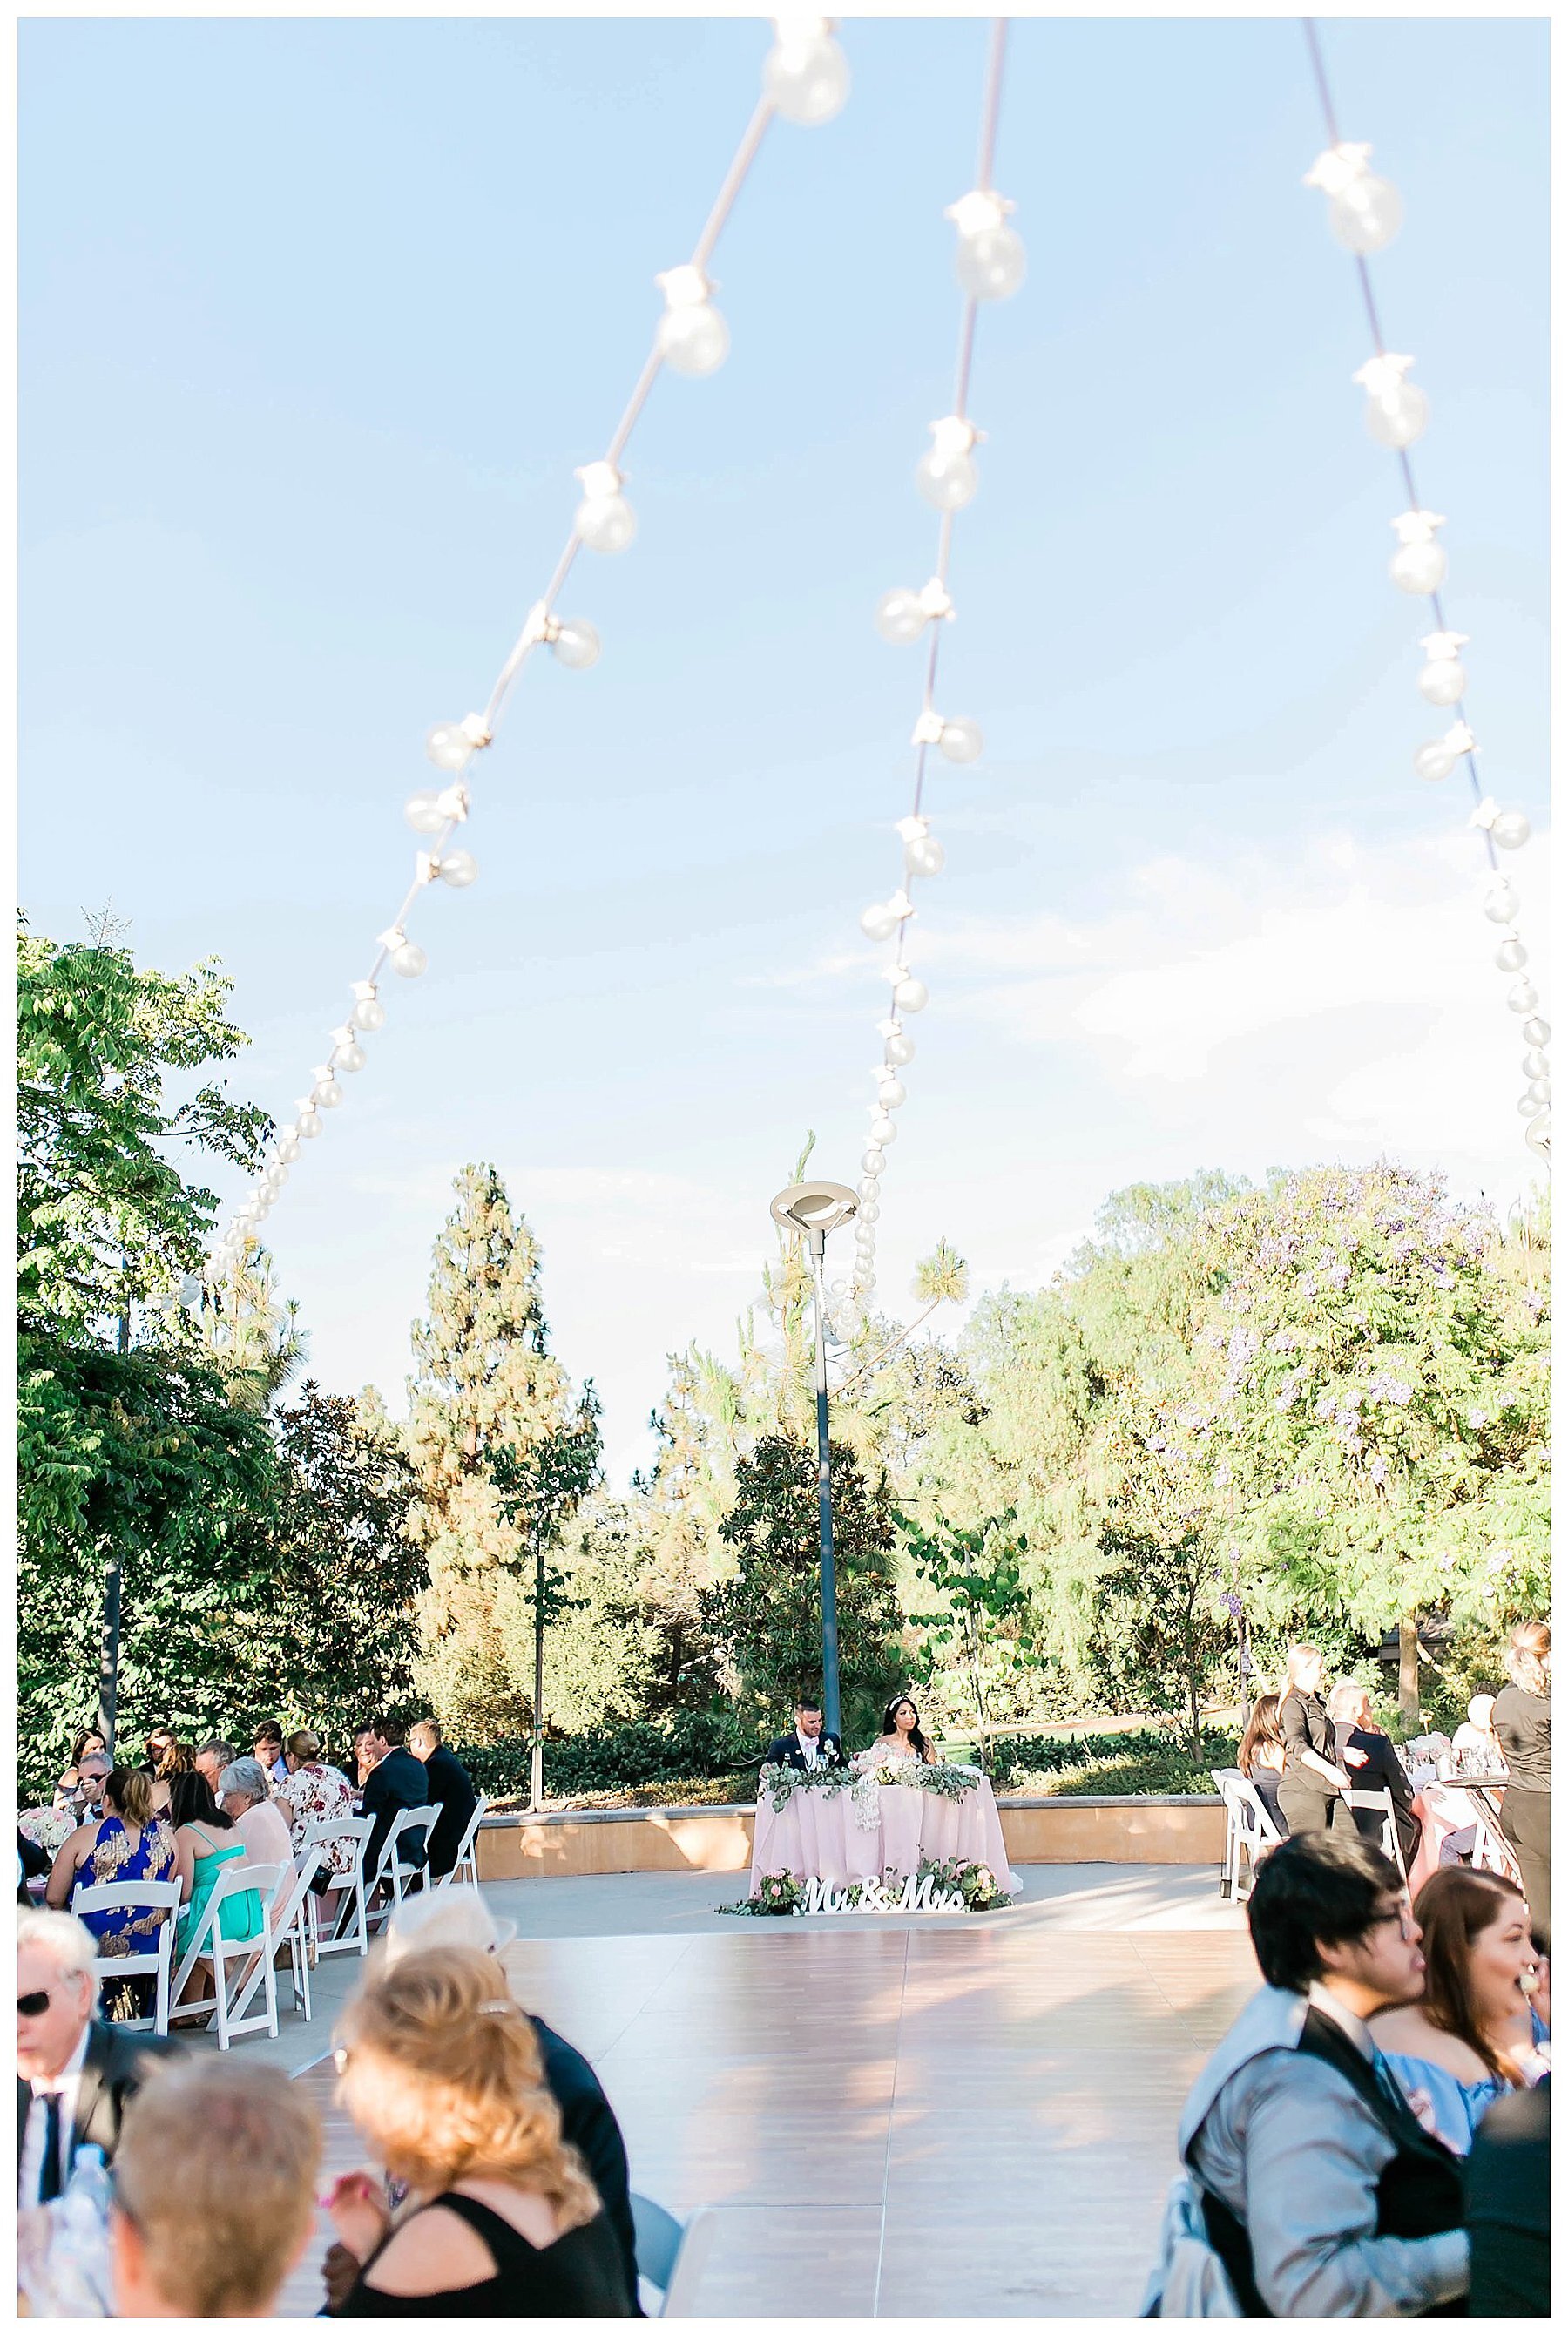  fairy lights over the guests at the reception 